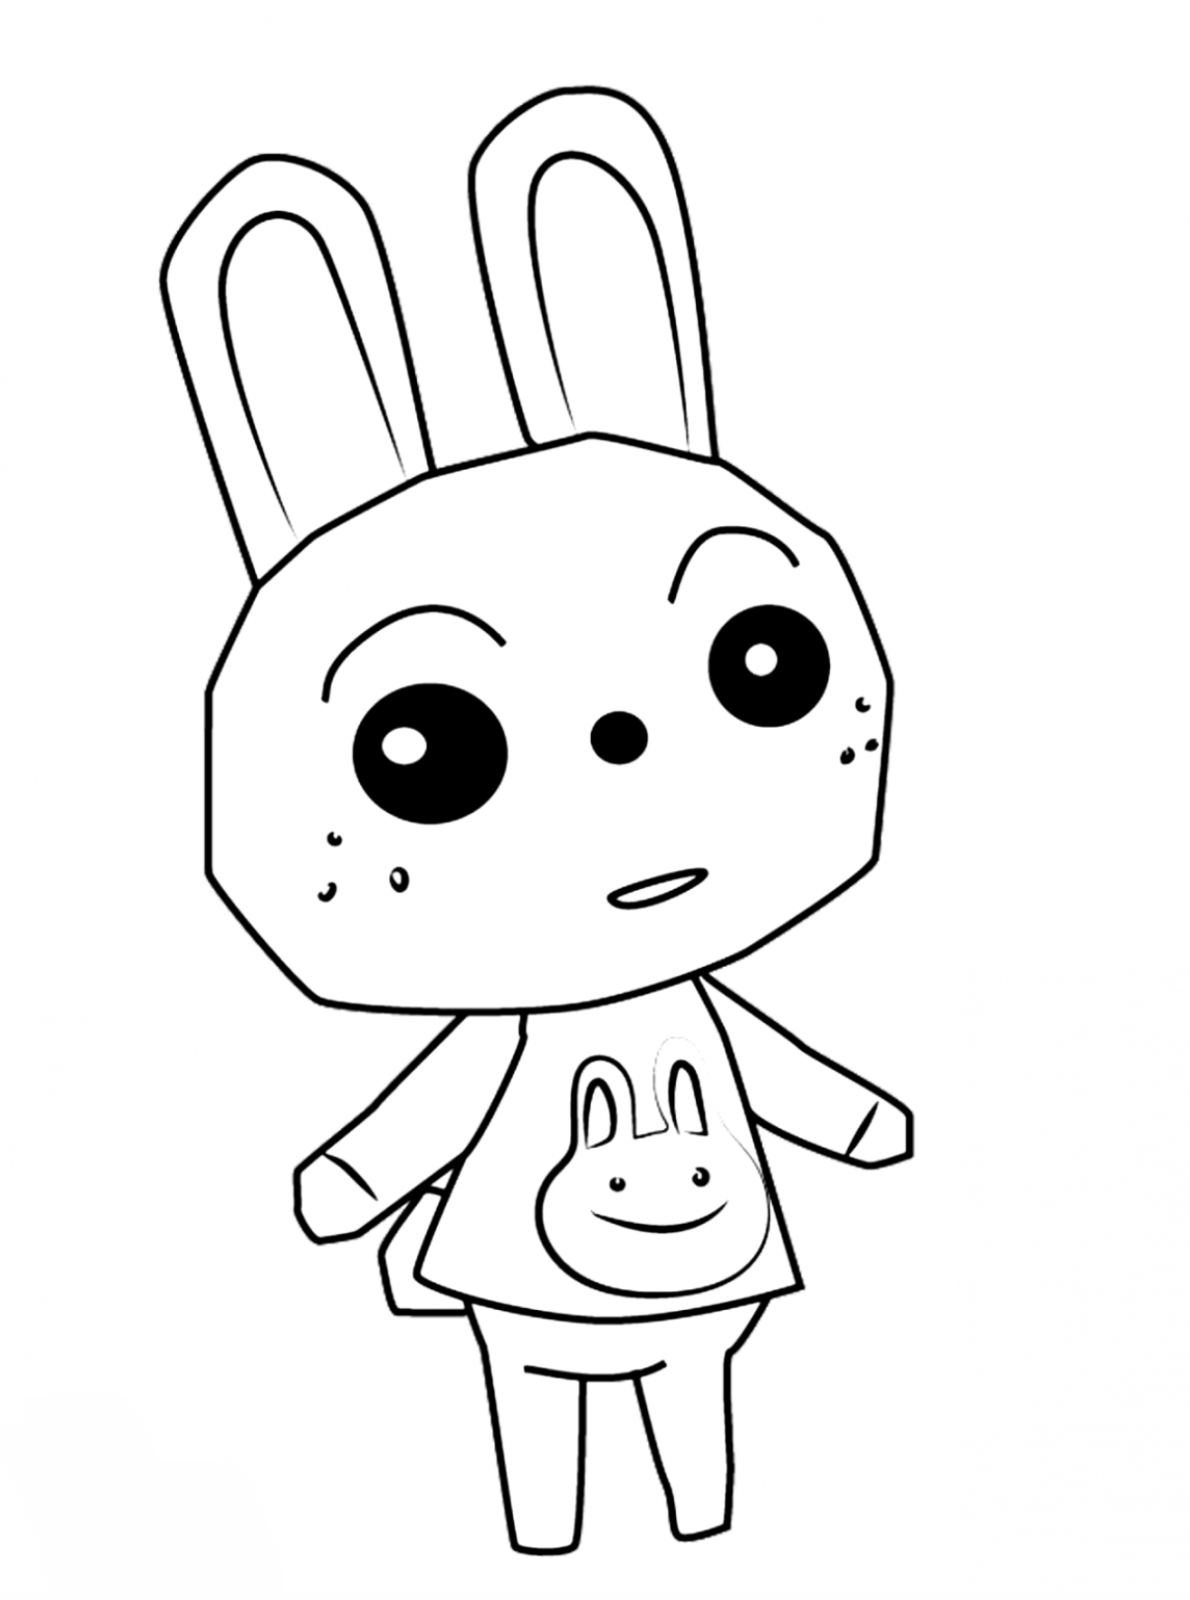 Ruby peppy Animal Crossing Coloring Pages